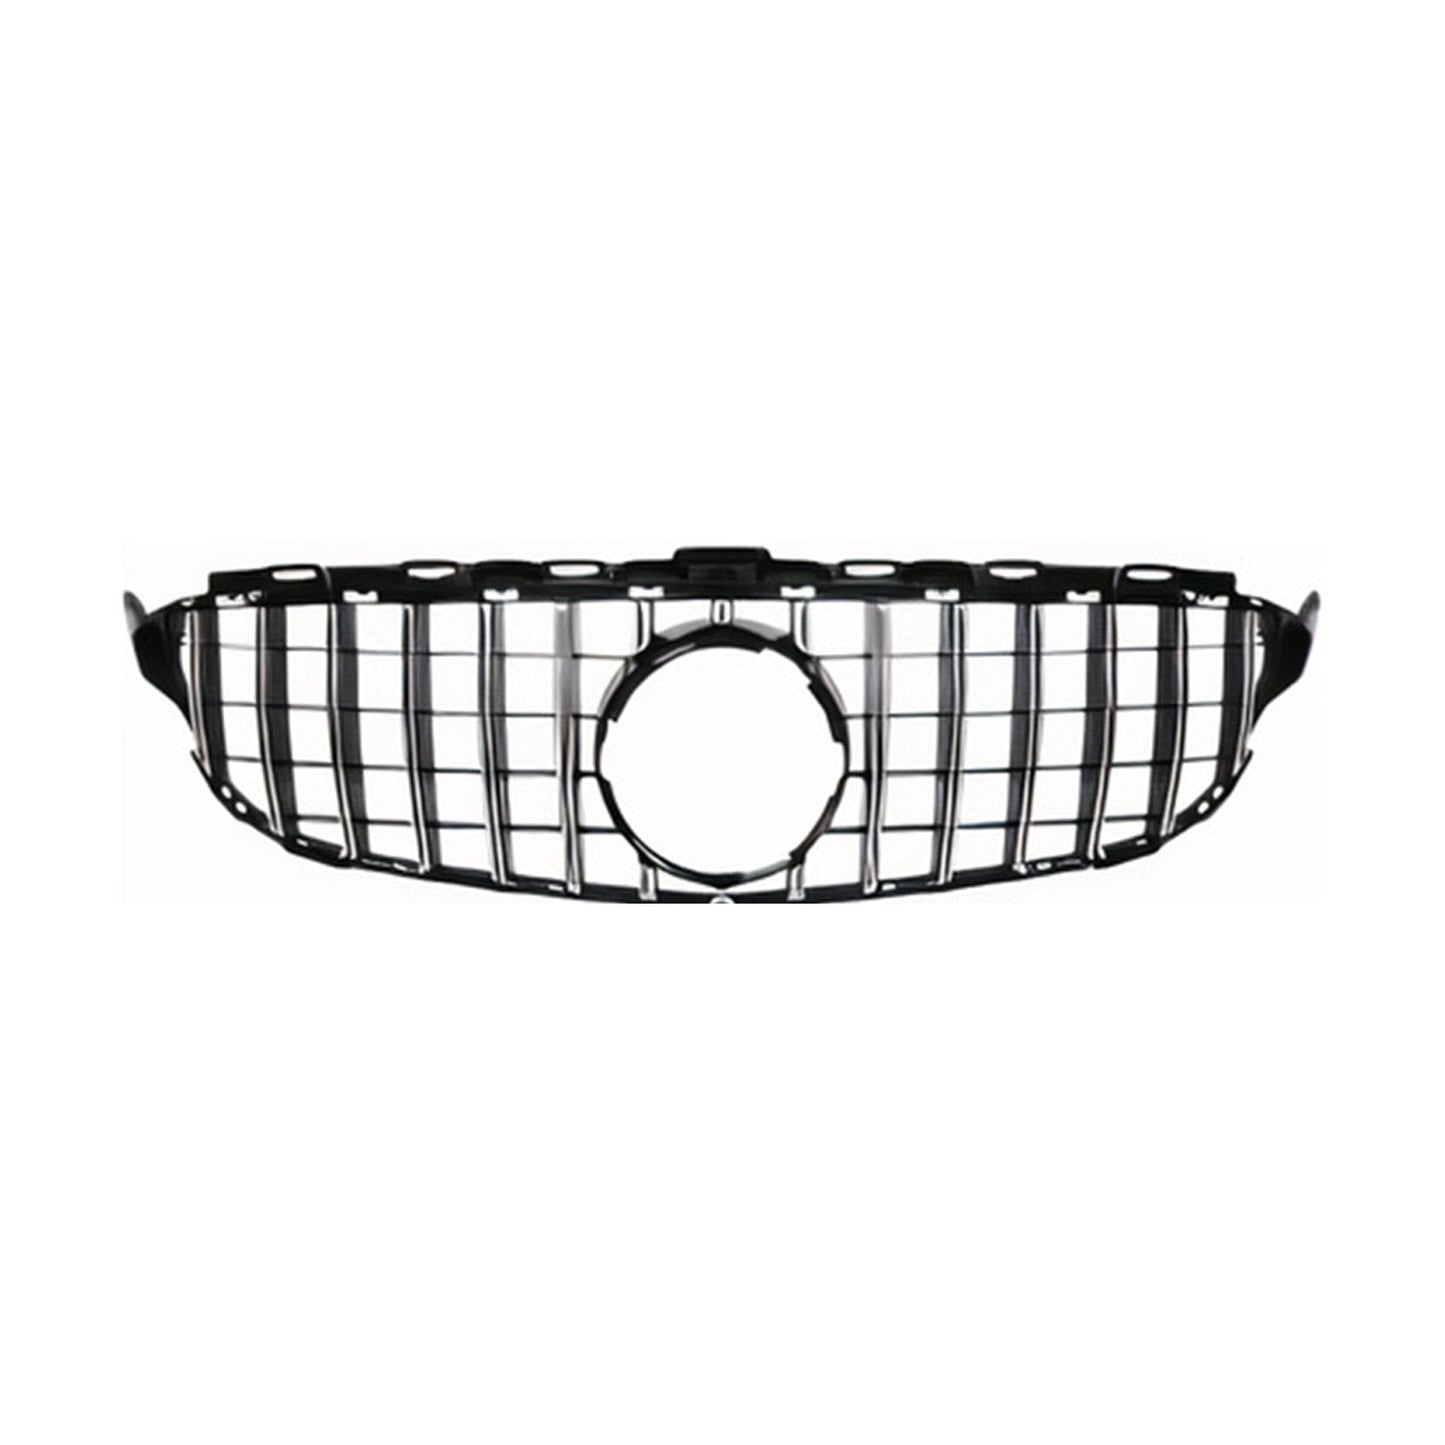 OMAC For Mercedes W205 C-Class 2015-18 Front Grille GT R Style Chrome W/O Camera Hole 4738P084GTS